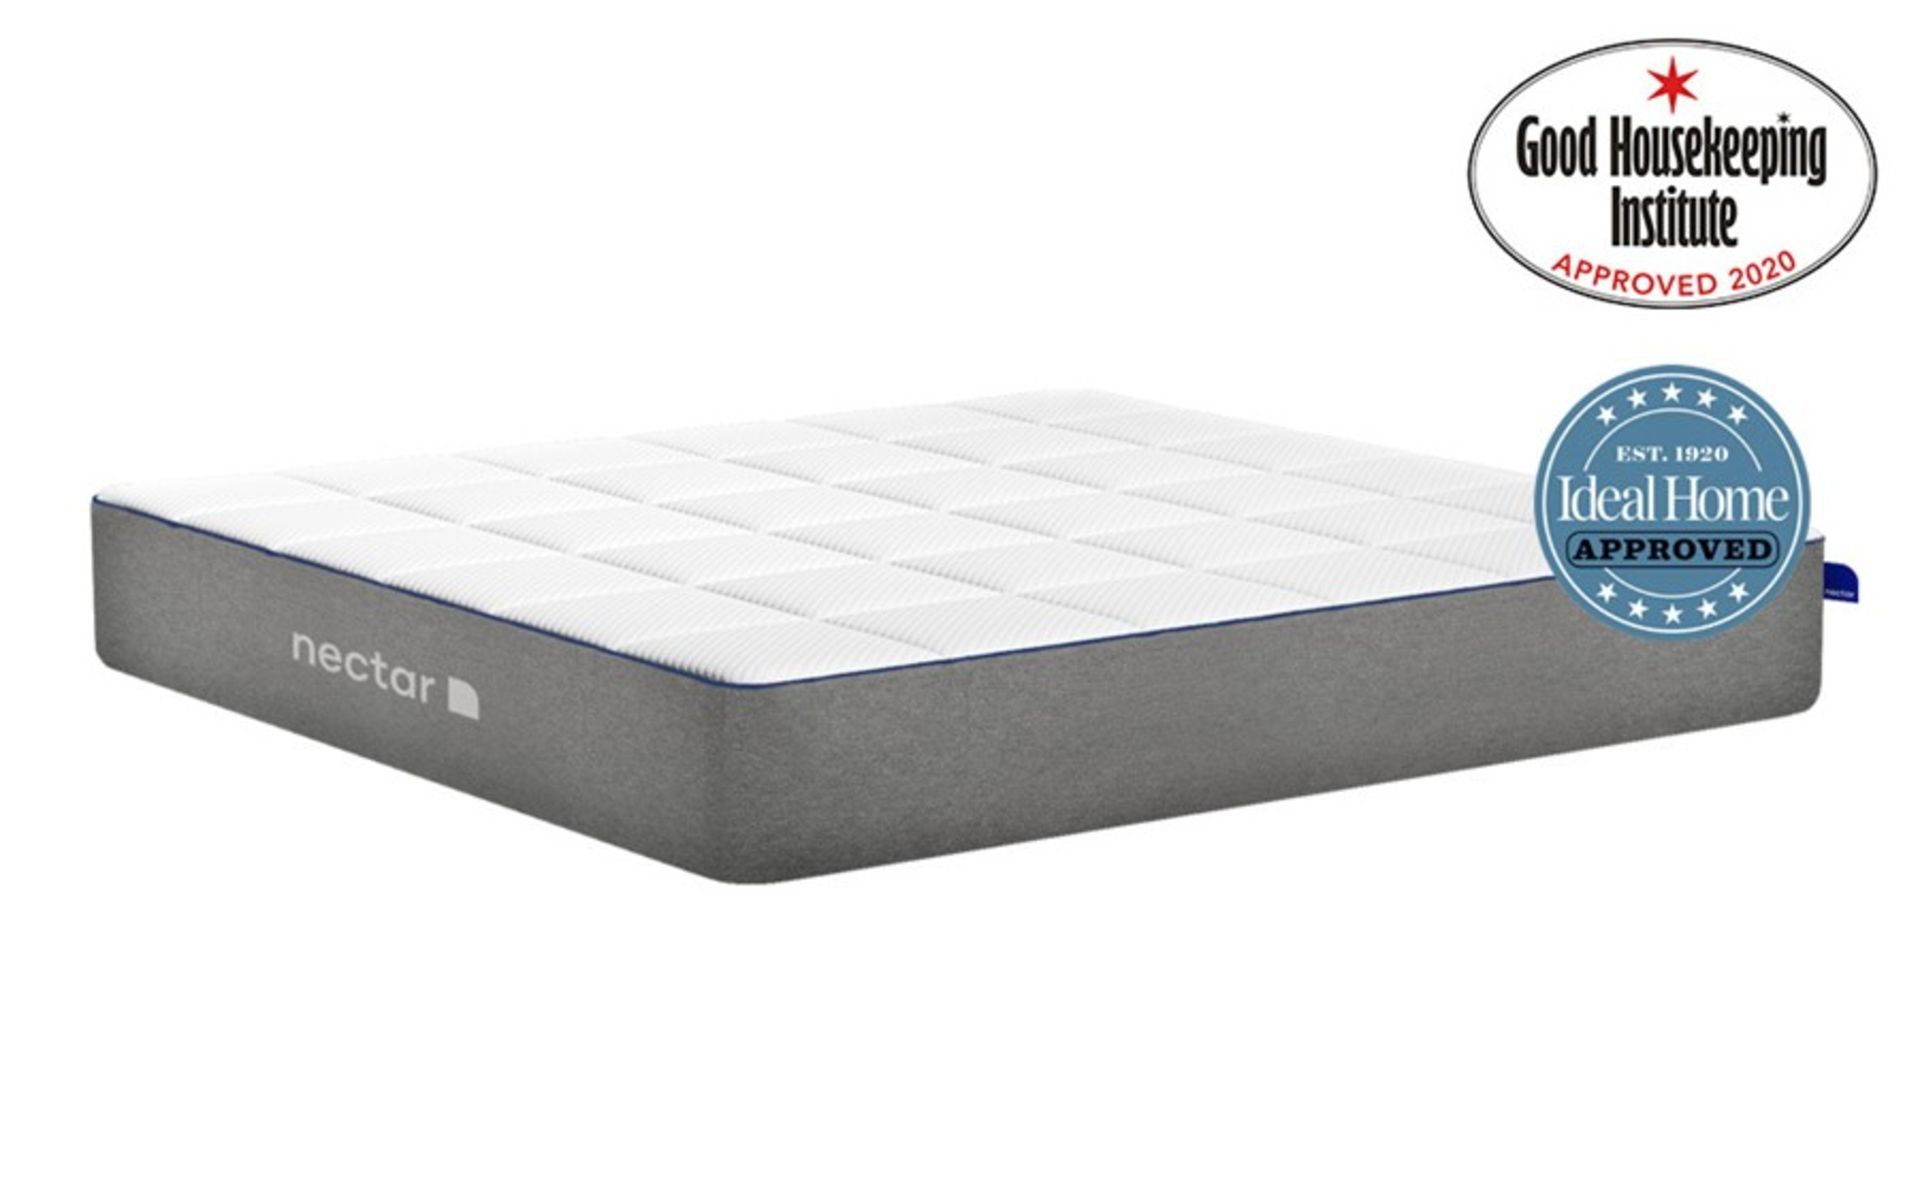 Nectar Professionally Refurbished Smart Pressure Relieving Single size Memory Foam Mattress, This - Image 2 of 2